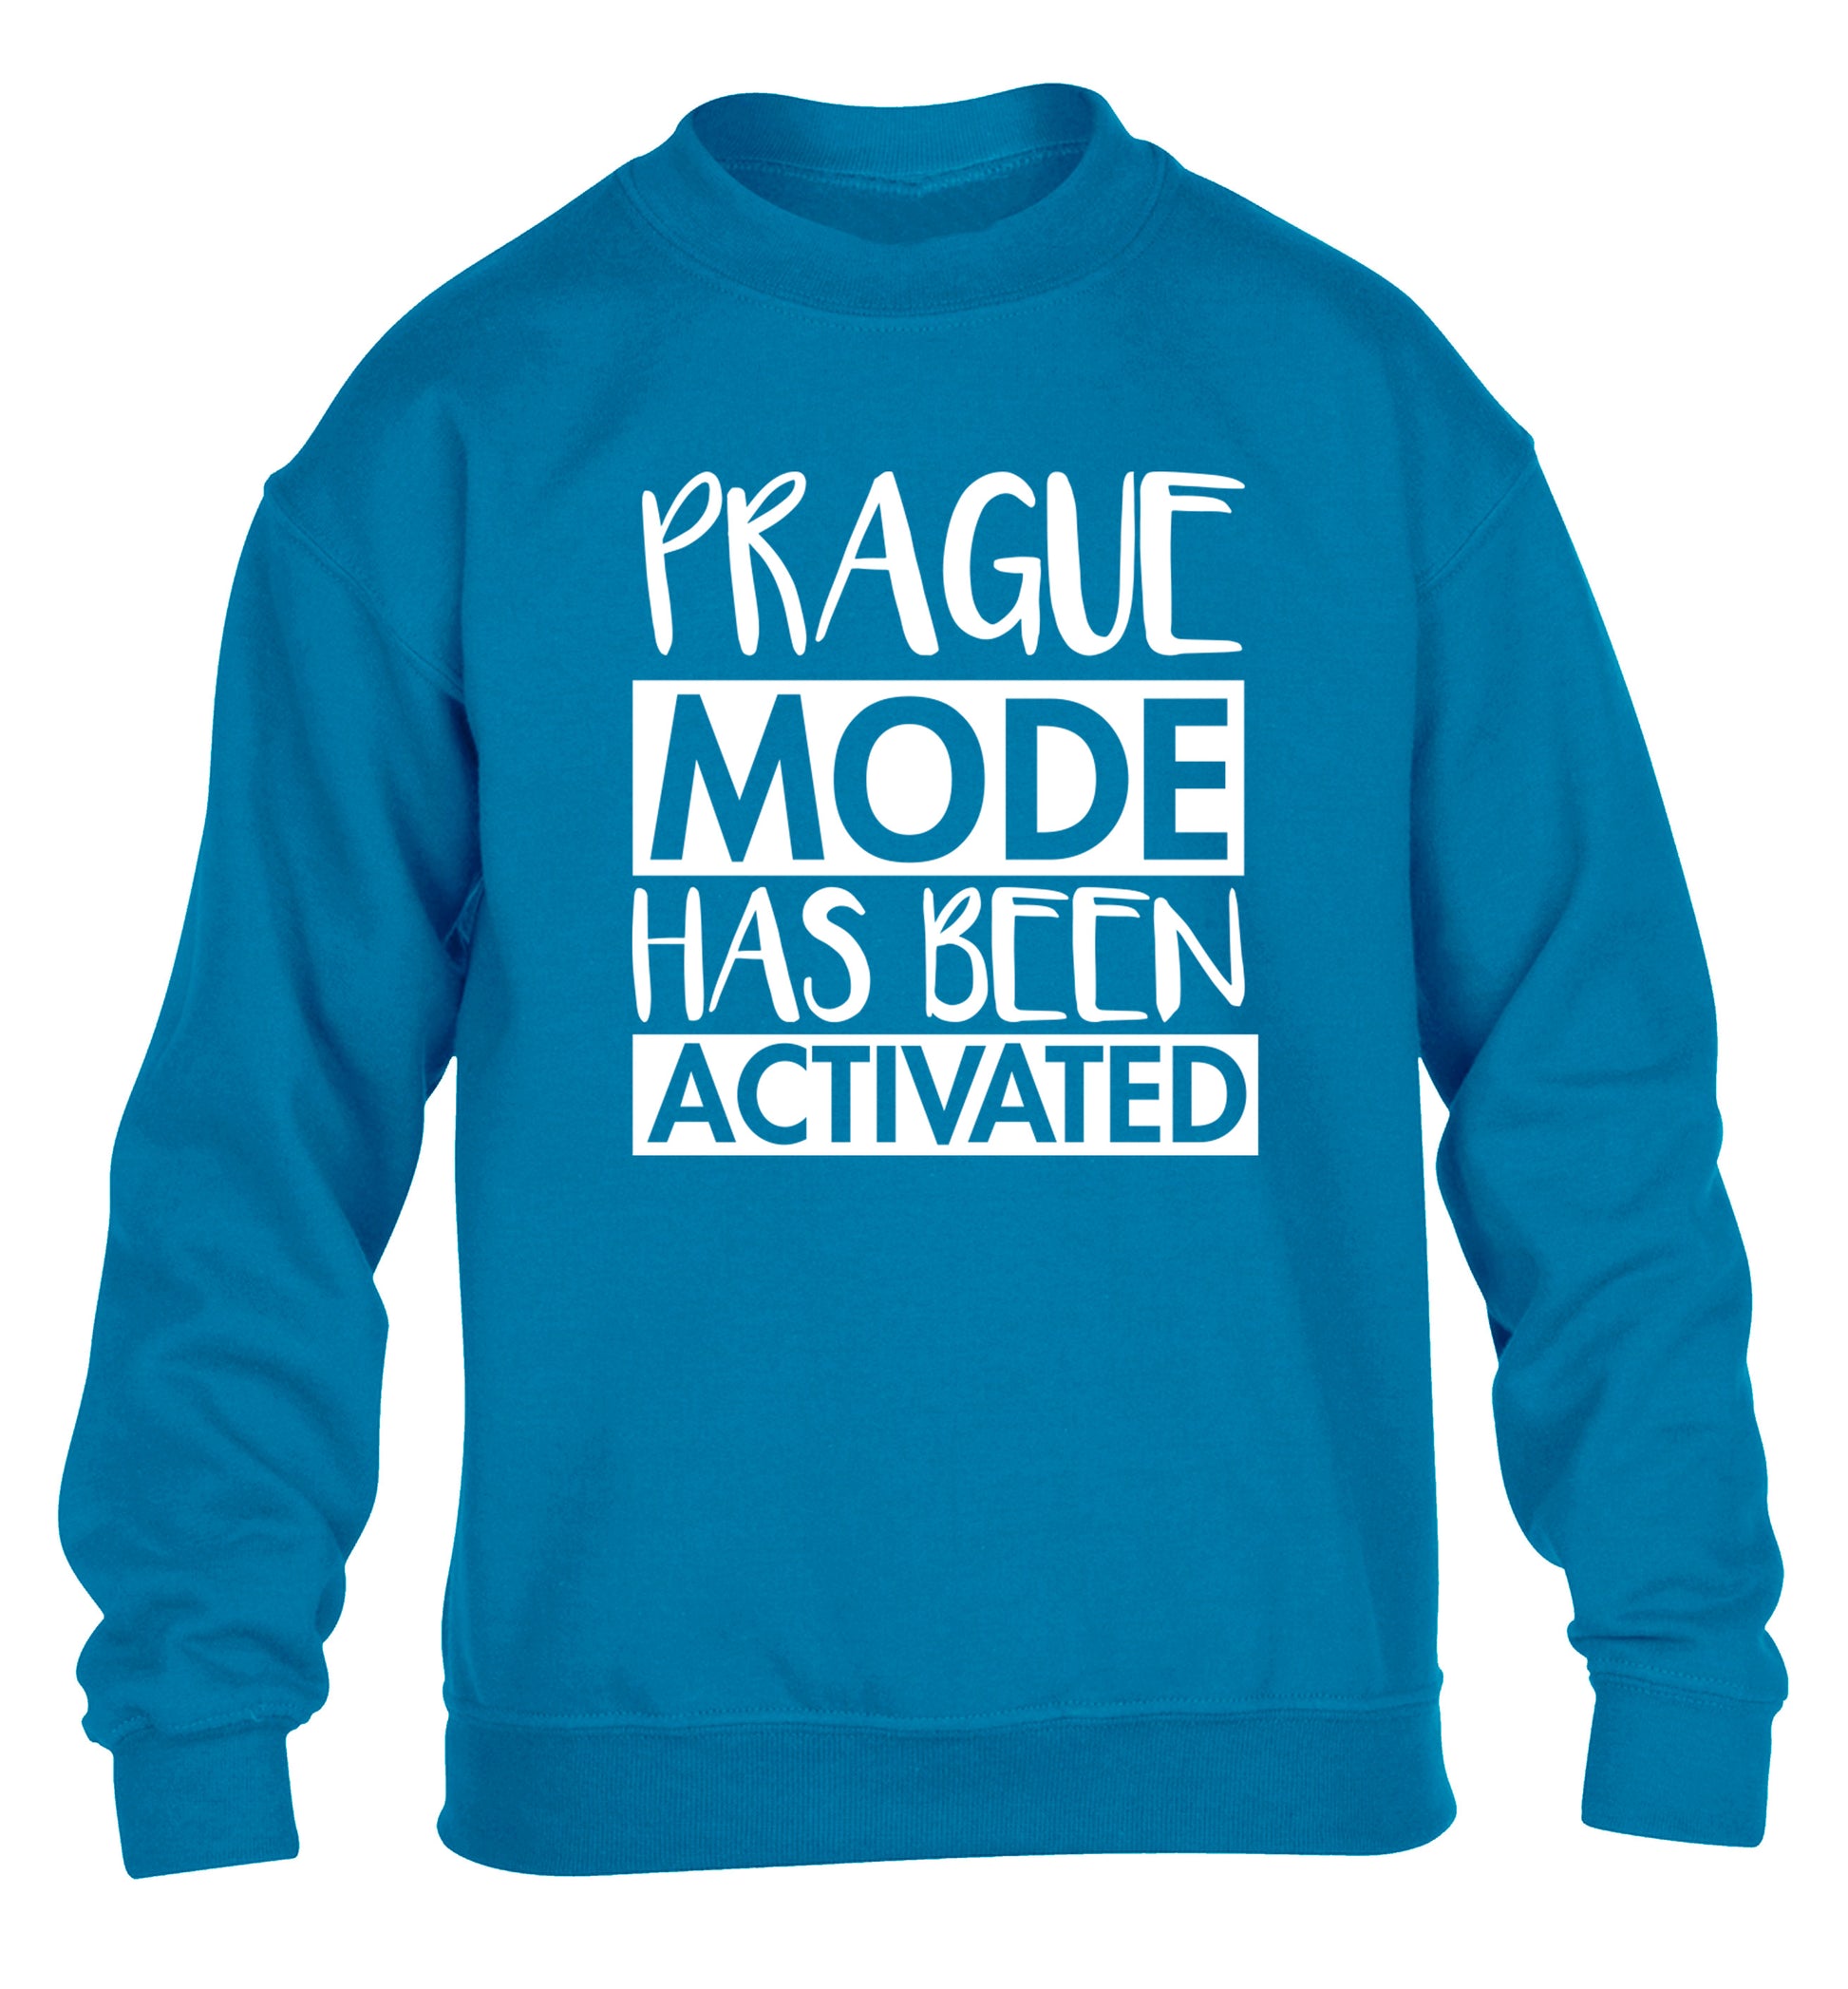 Prague mode has been activated children's blue sweater 12-13 Years